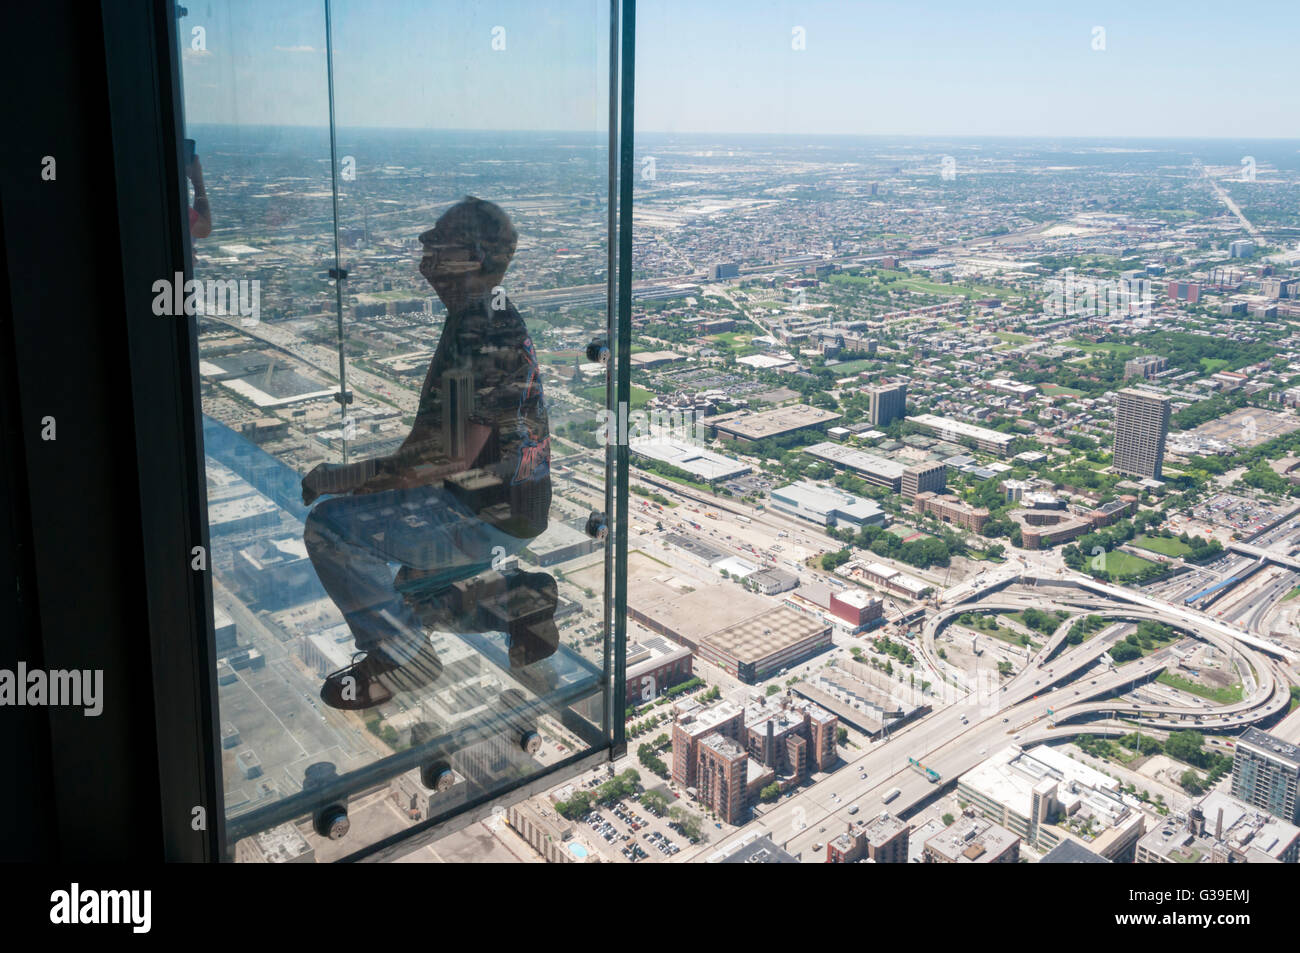 A man has his photograph taken on the glass balcony to the observation deck of the Willis Tower, with an aerial view of Chicago. Stock Photo